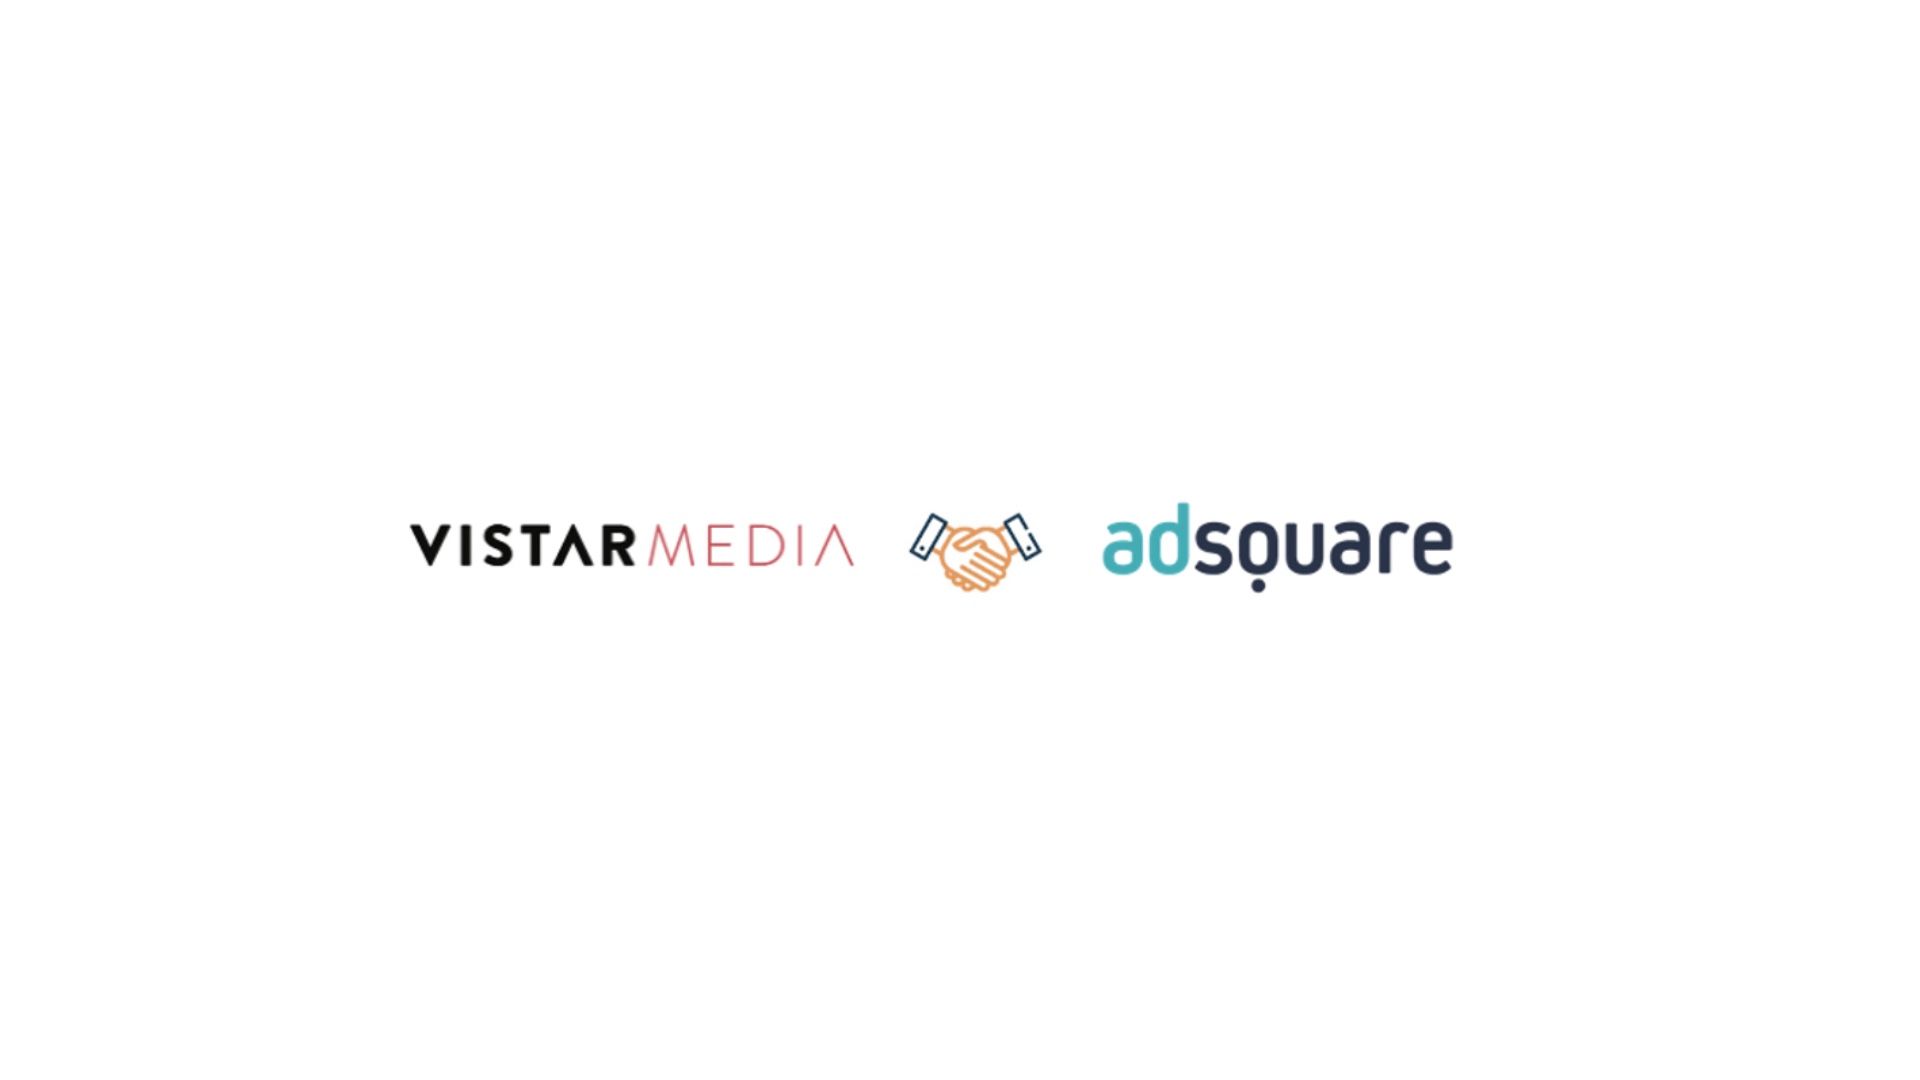 Adsquare partners with Vistar Media